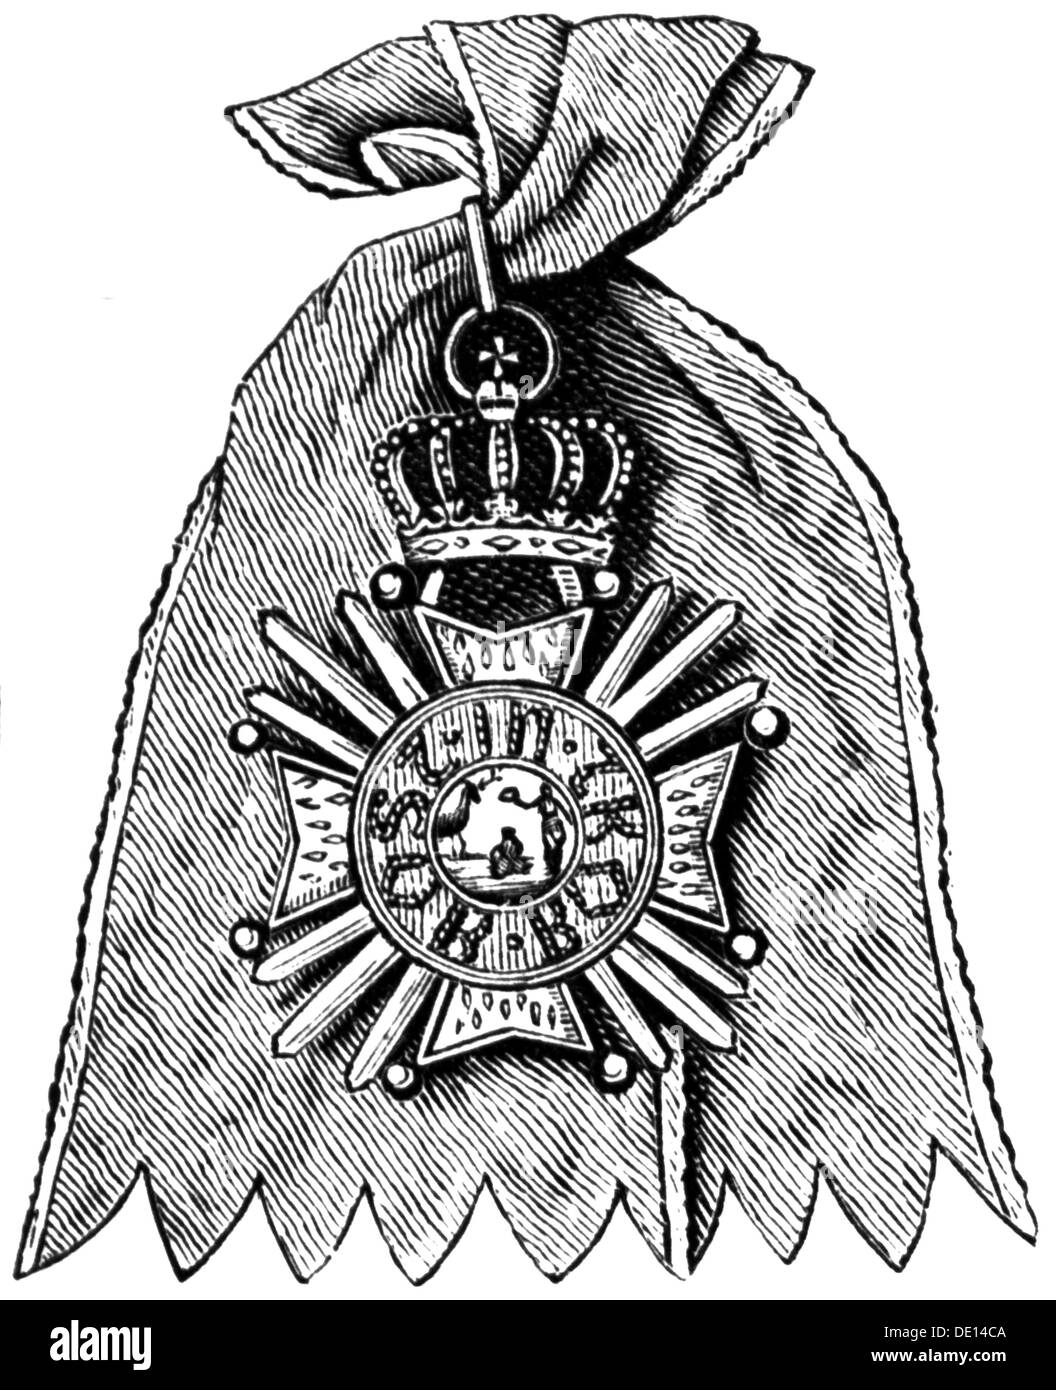 medals and decorations, Germany, Bavaria, Oder of Saint Hubert, founded 3.11.1444 by Duke Gerhard III of Juelich and Berg, wood engraving, 2nd half 19th century, Bavarian Order of Saint Hubert, Royal Order of the House of Wittelsbach, worldly Order of Chivalry, crosses, Maltese cross, Kingdom of Bavaria, Juelich-Berg, medal, decoration, medals, decorations, founded, founding, historic, historical, Additional-Rights-Clearences-Not Available Stock Photo